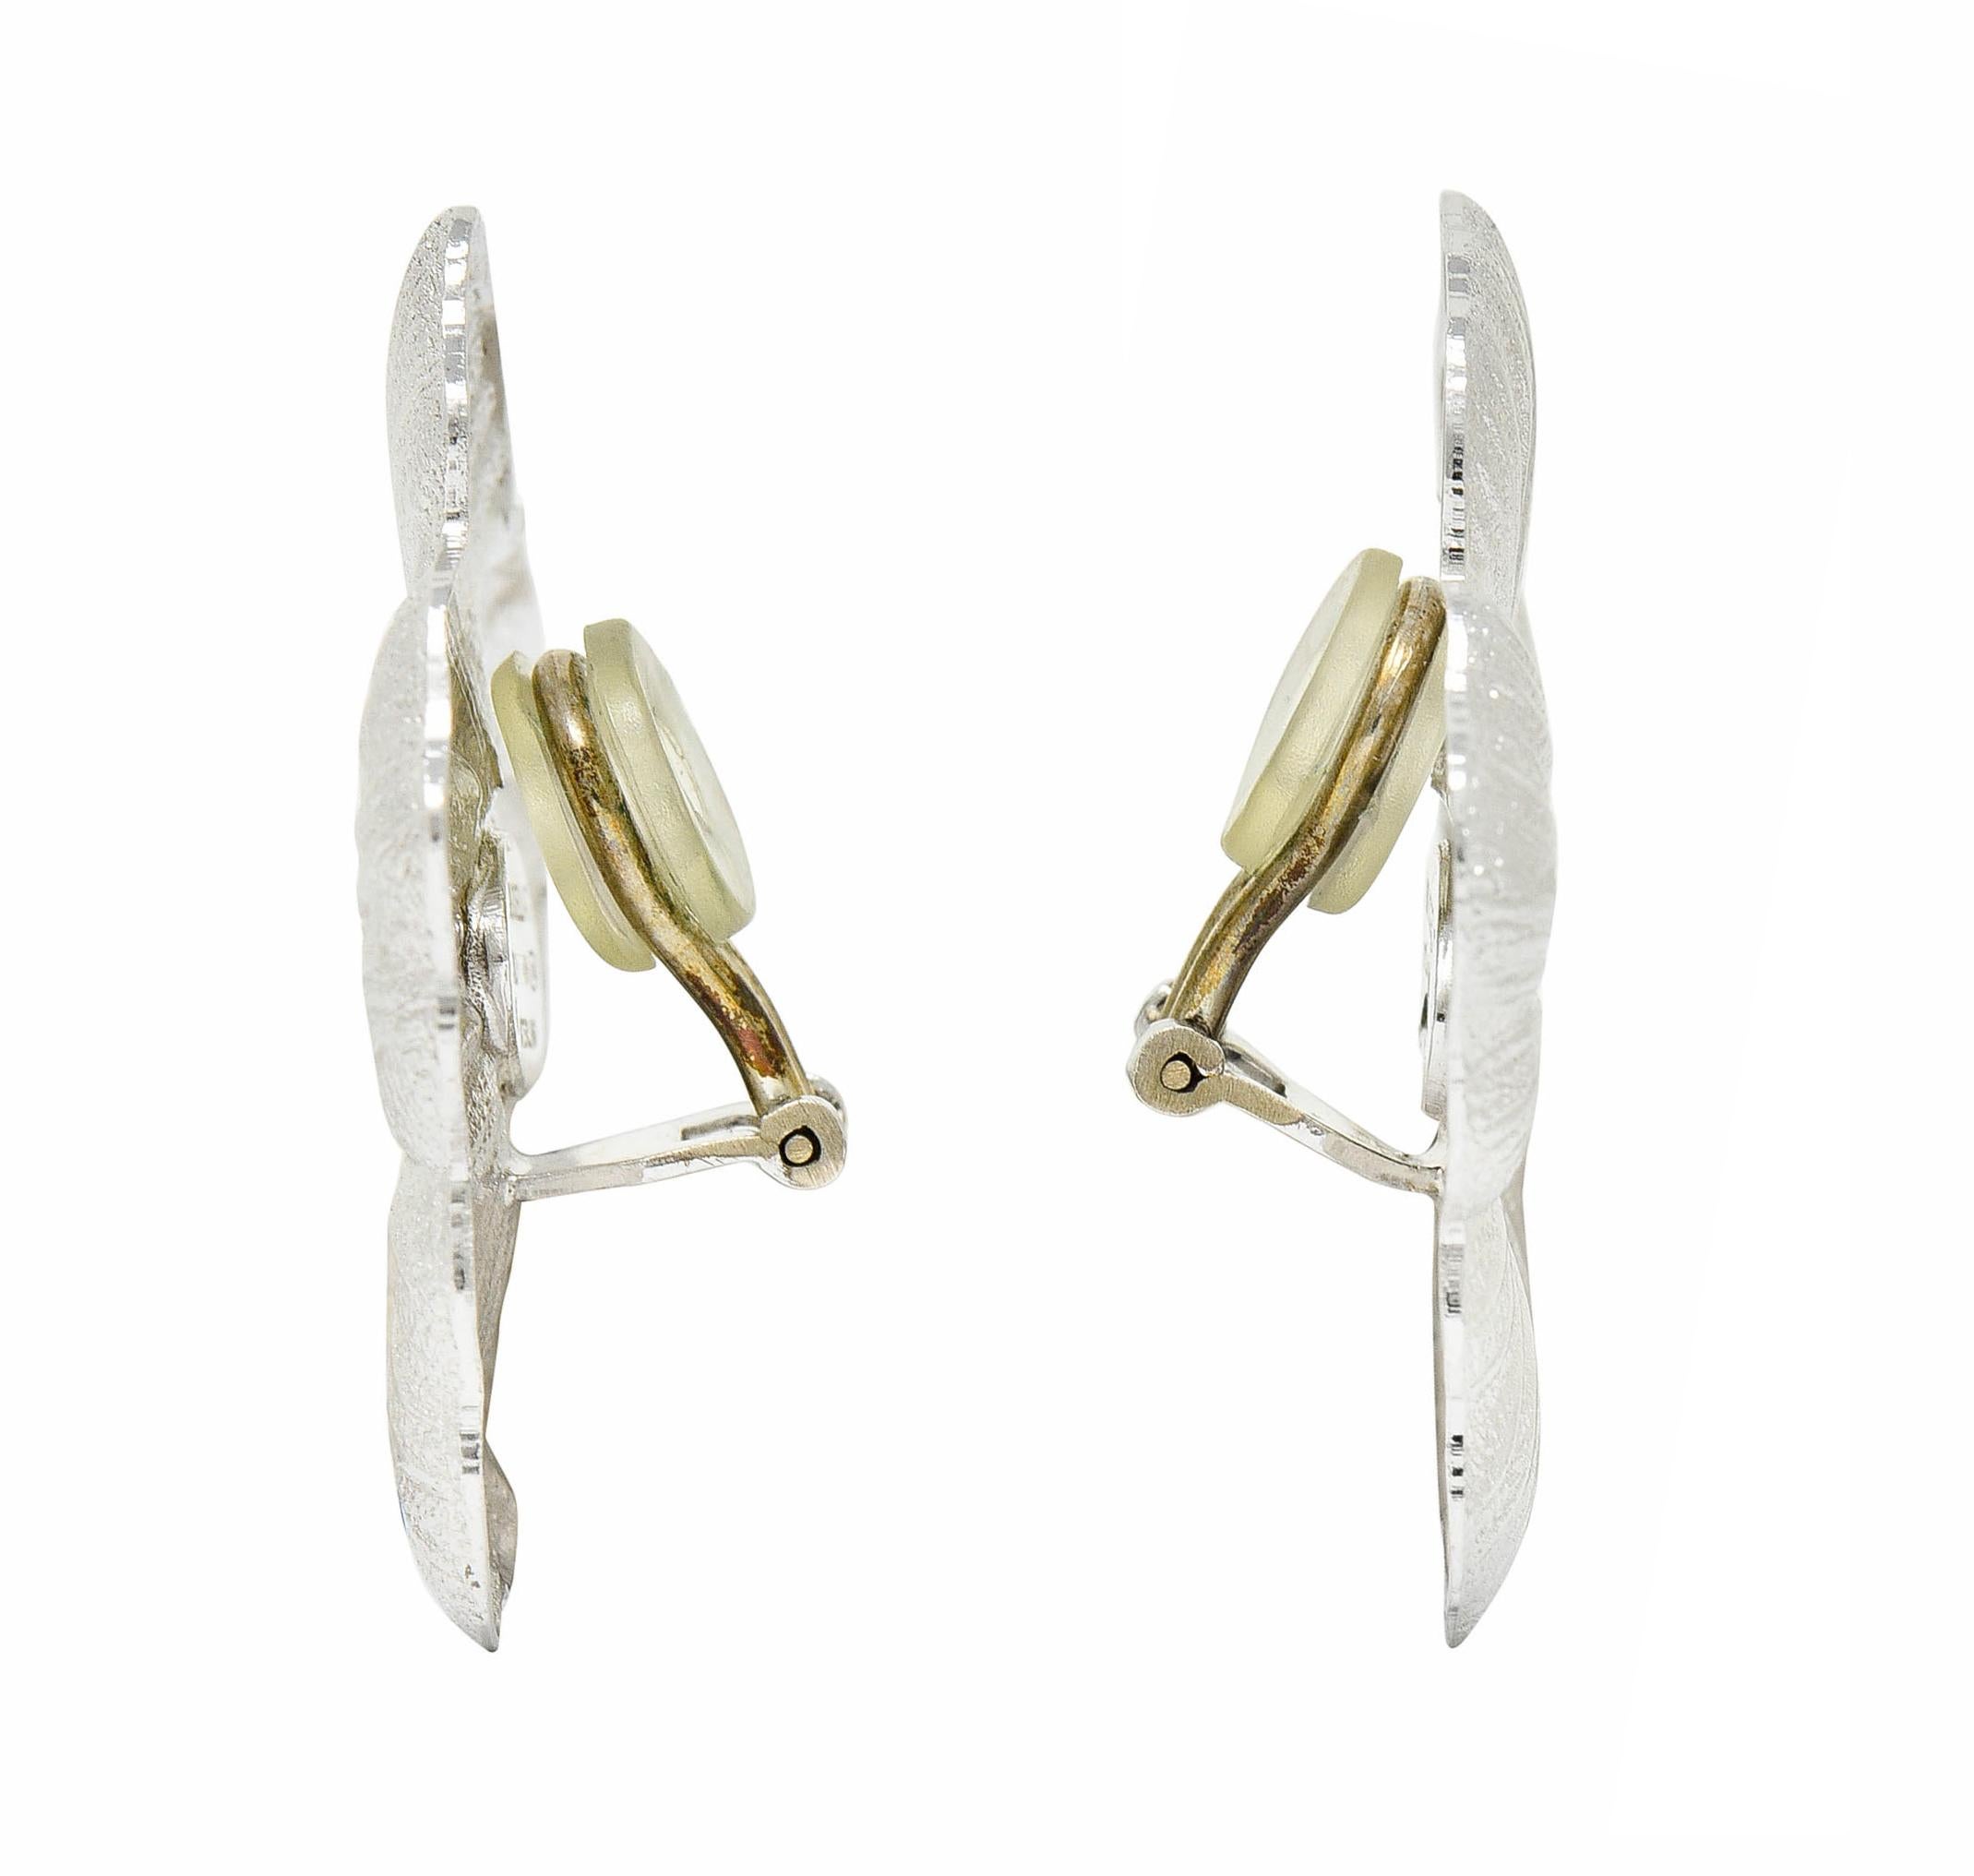 Ear-clips are designed as repoussè rendered gardenia blossoms

With intricate petal veining and a clustered vermeil appliquè center

Completed by hinged omega backs

With Italian assay marks and stamped for sterling silver

Signed Buccellati

From